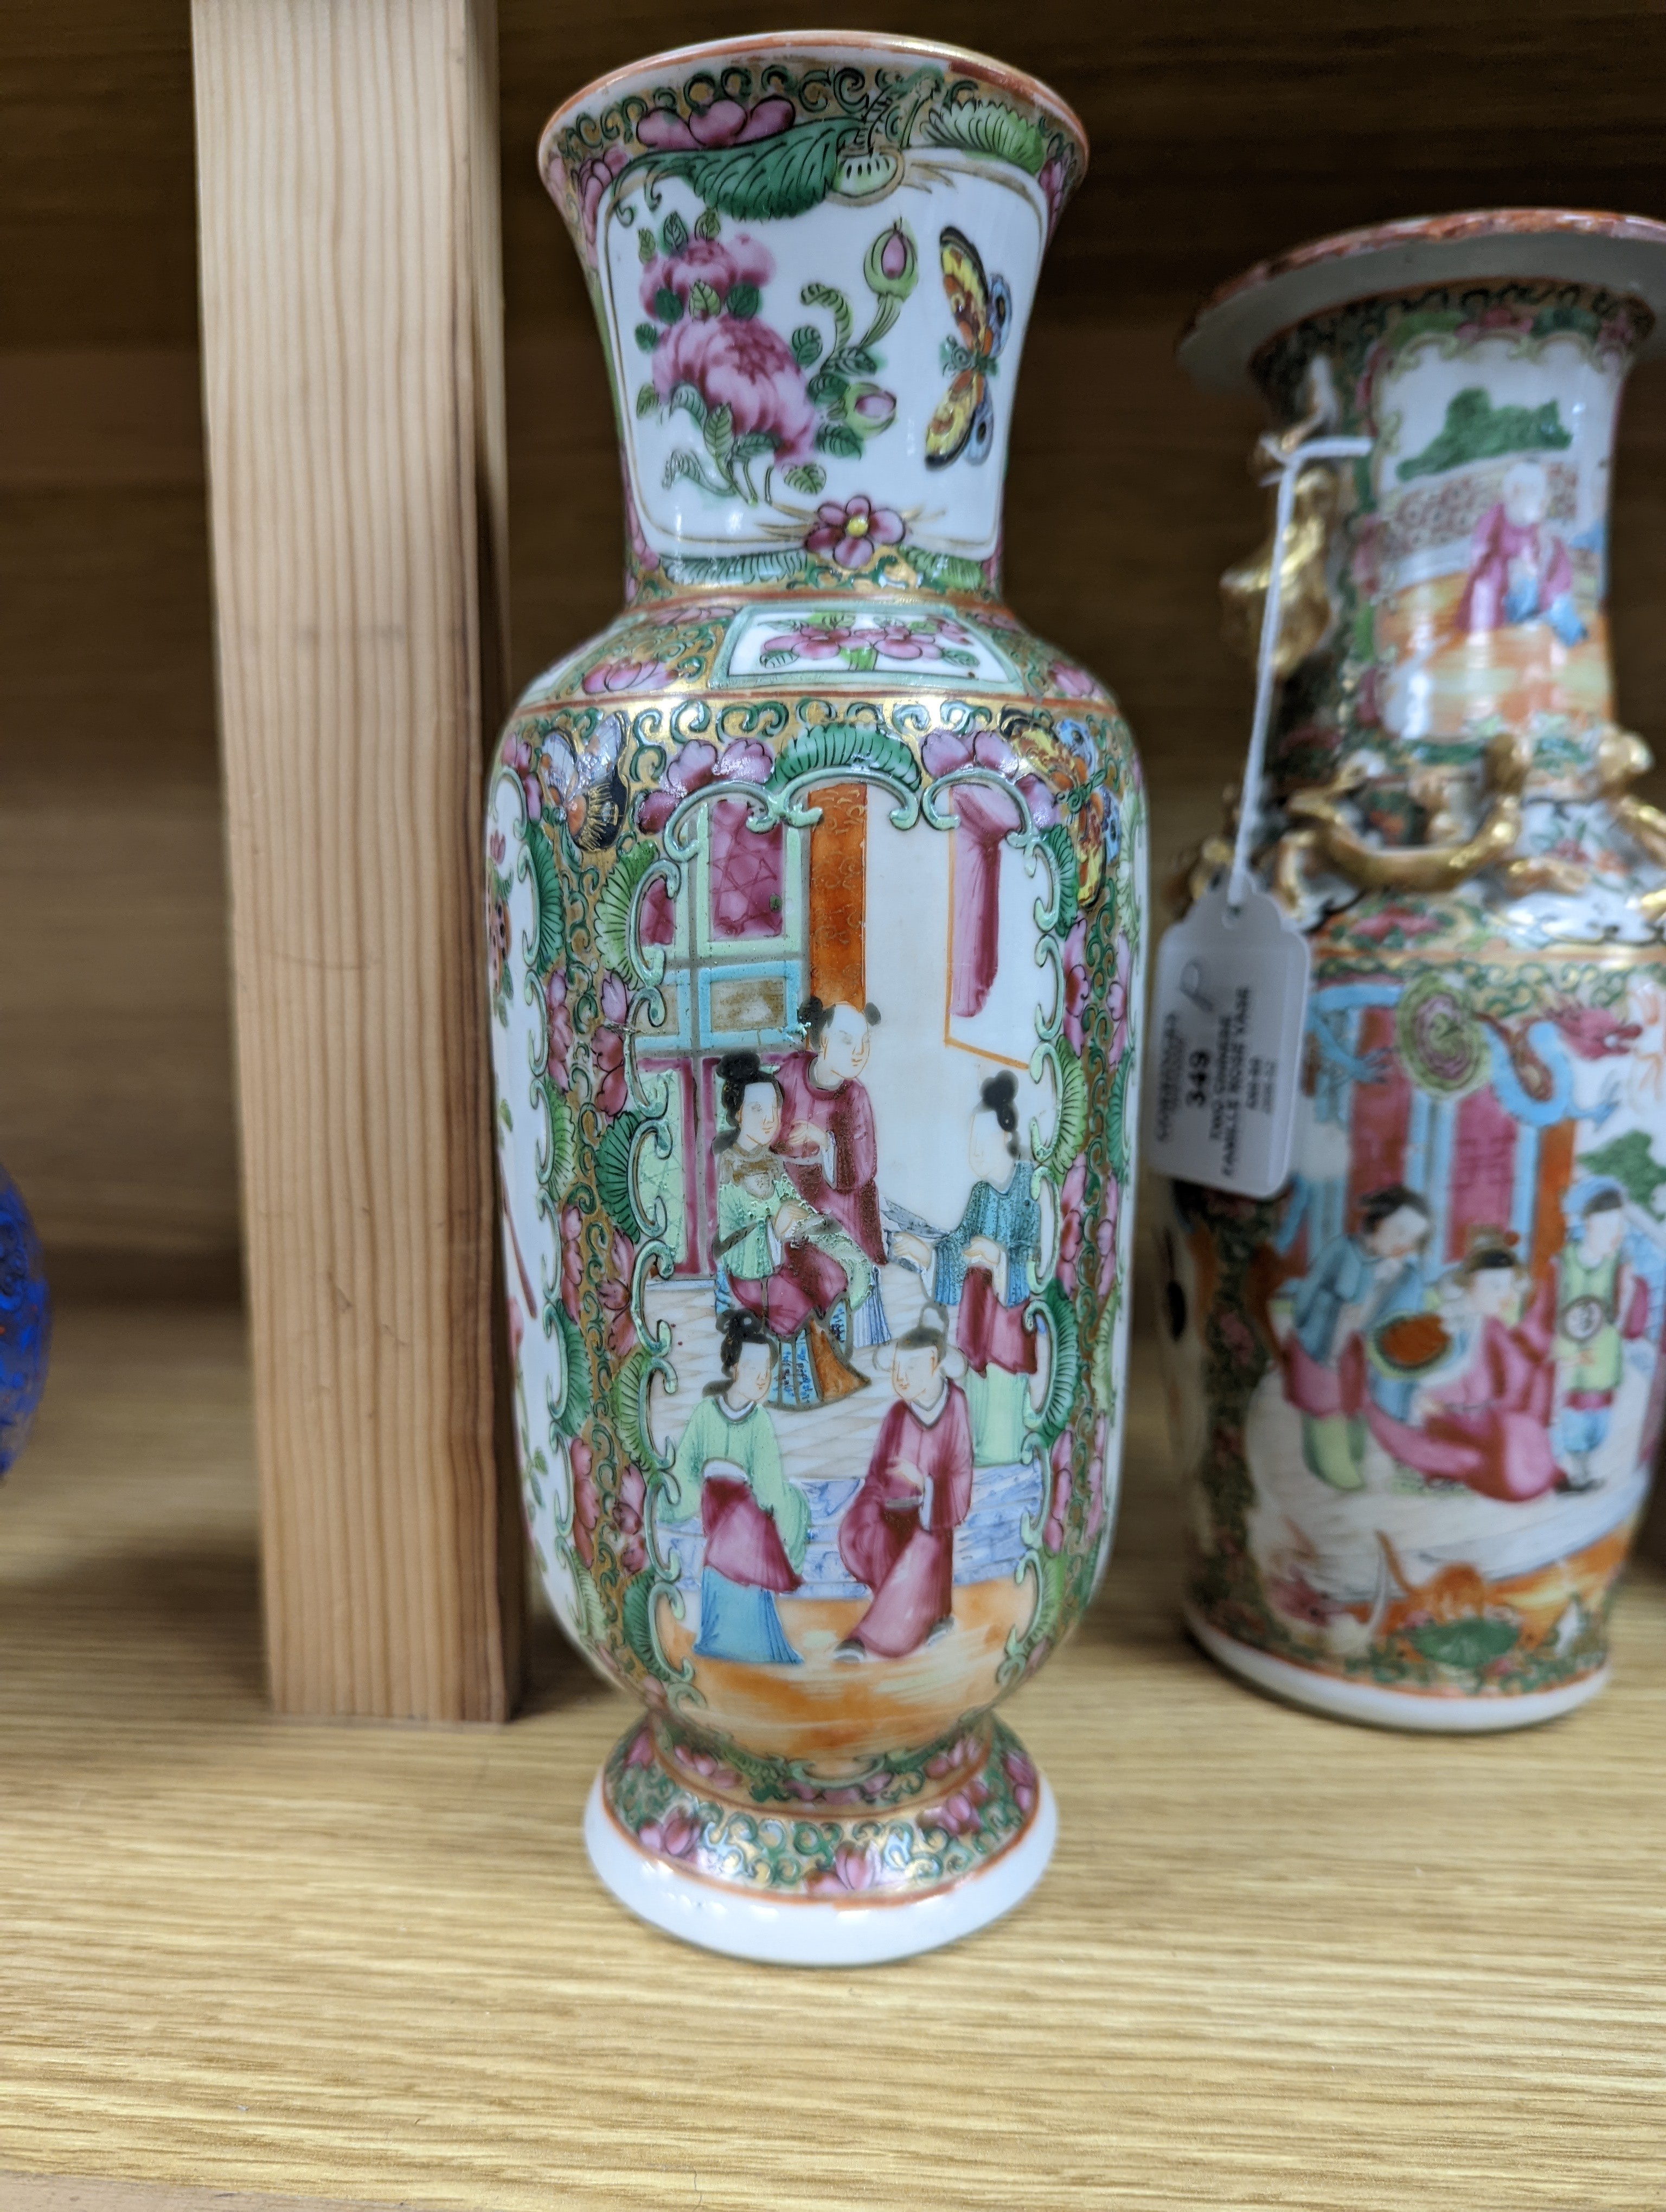 Two Chinese famille rose vases, late 19th century, tallest 26 cm, one wood stand, some restoration